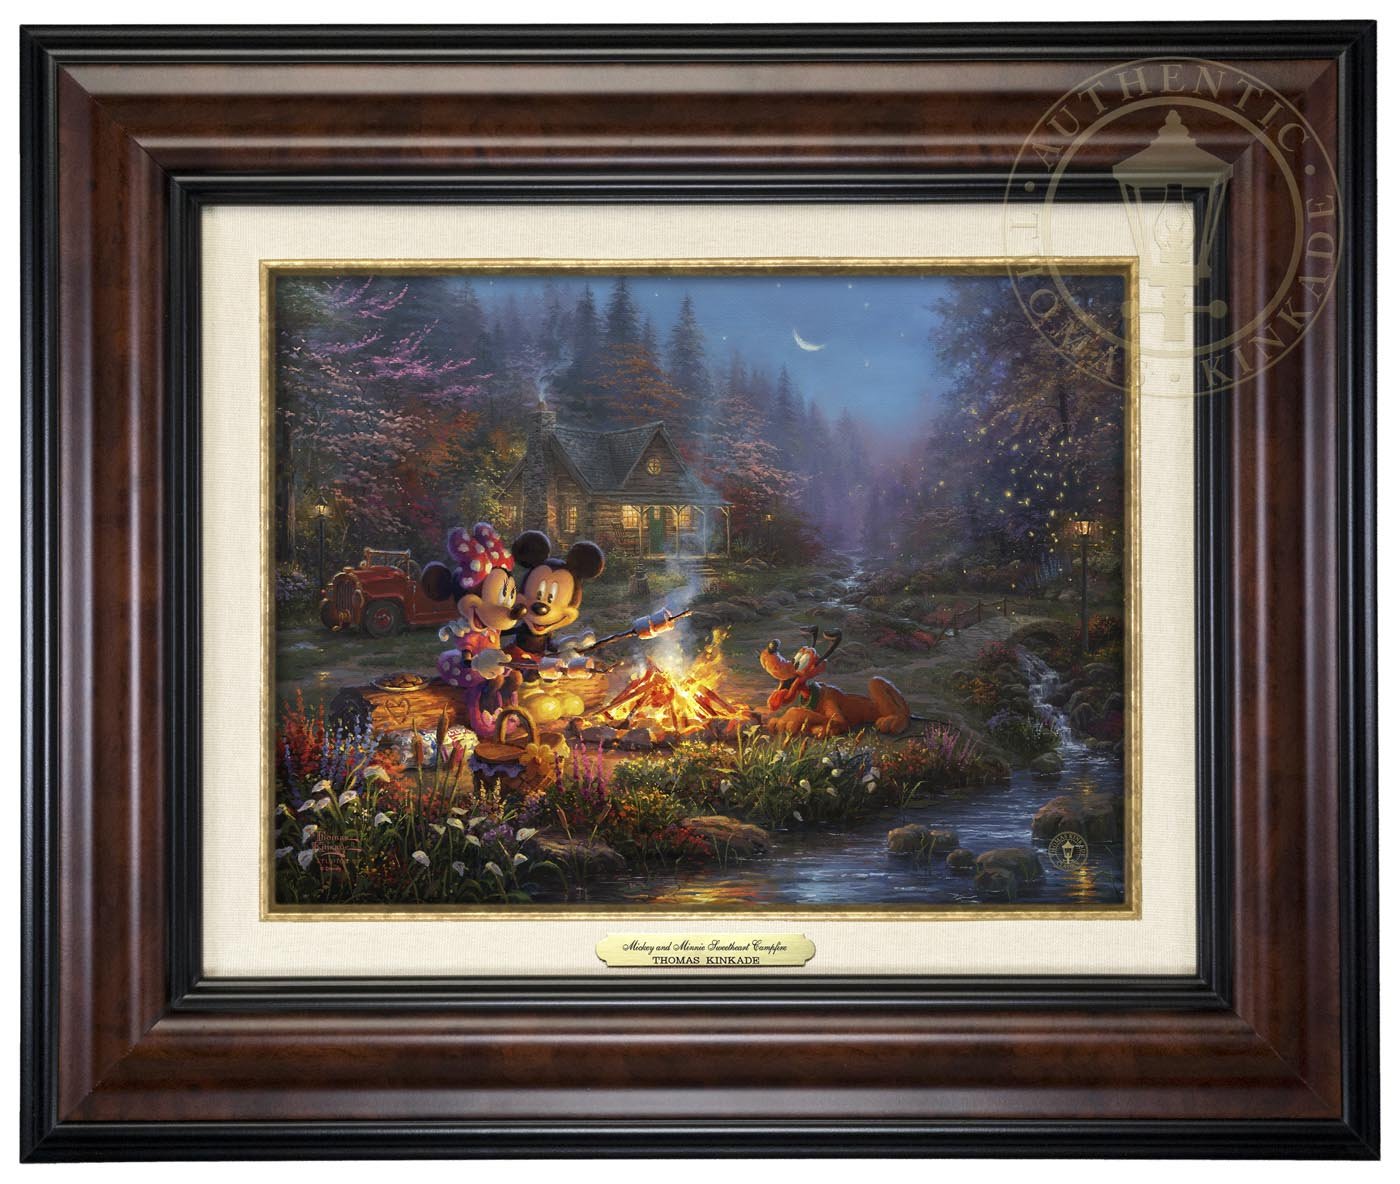 Mickey and Minnie are seen relaxing together on an old log, roasting marshmallows over a crackling campfire after spending a long day of exploring the vast trails of the forest - Burl Frame